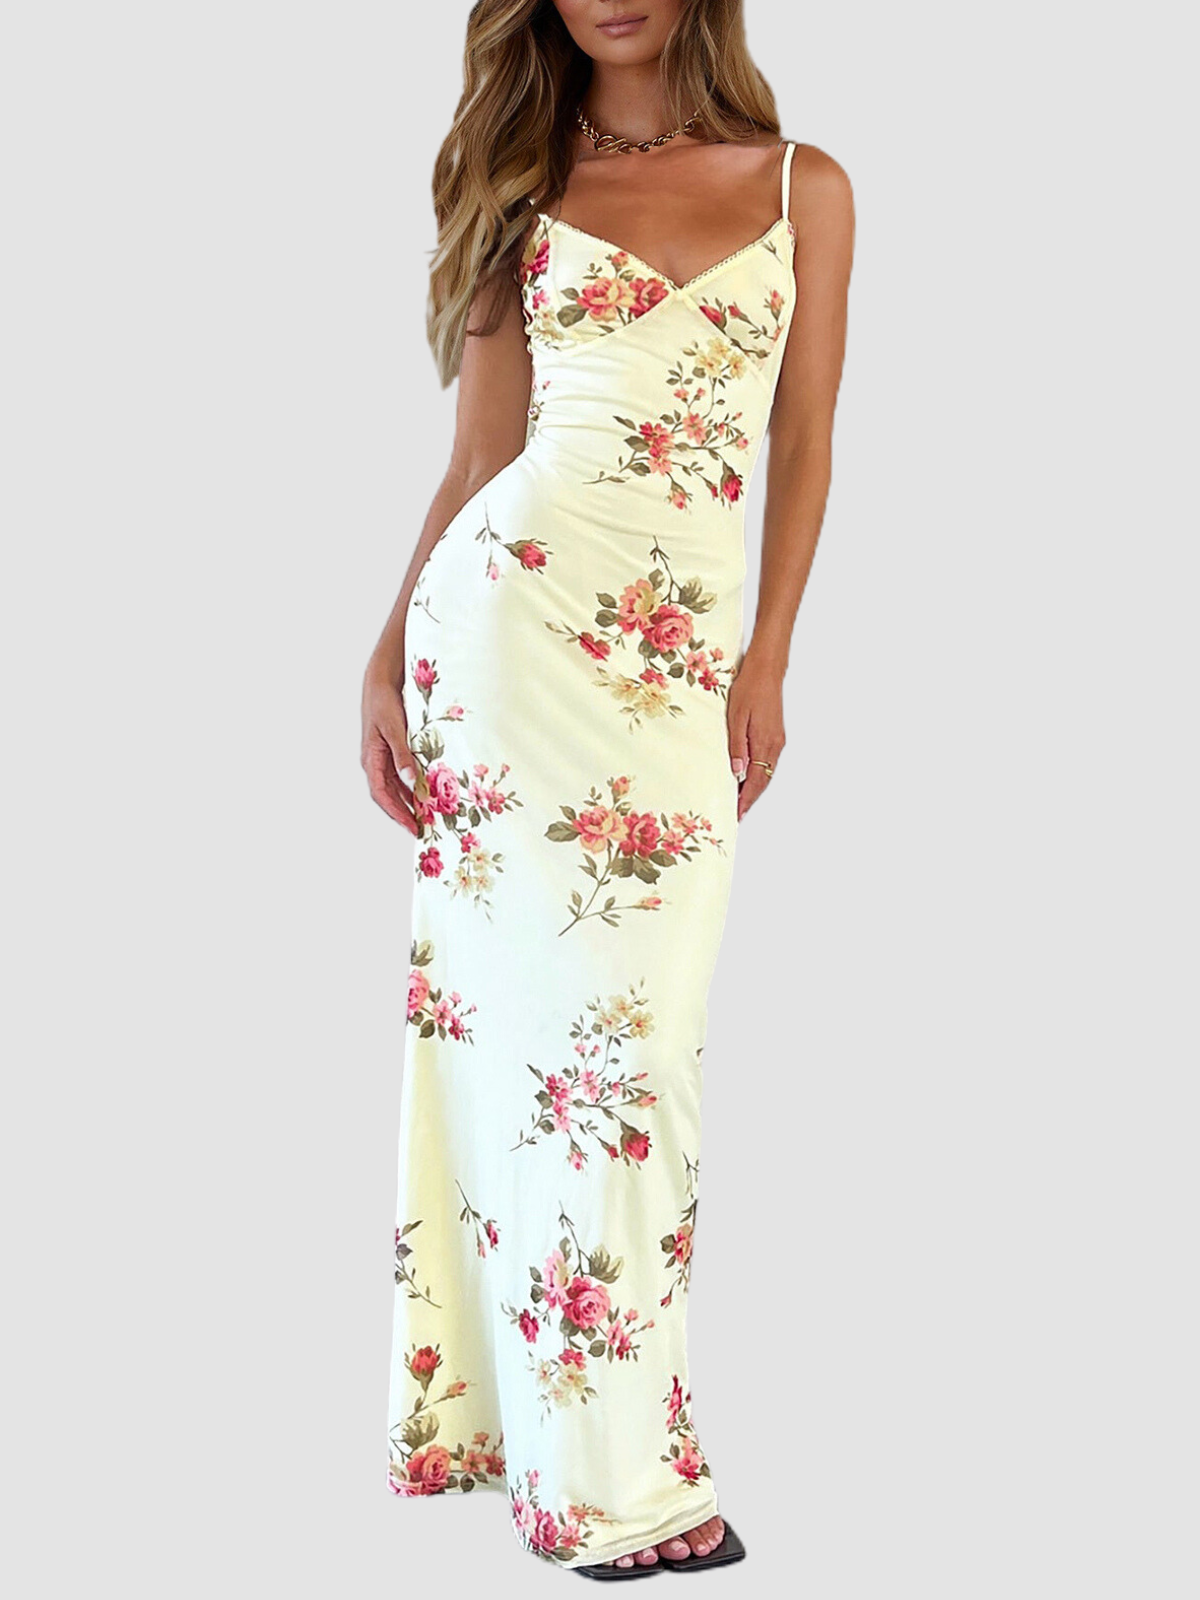 Women's Floral Spaghetti Strap Maxi Dress Sexy Backless Bodycon Slip Dresses Spring Clubwear-AnotherChill